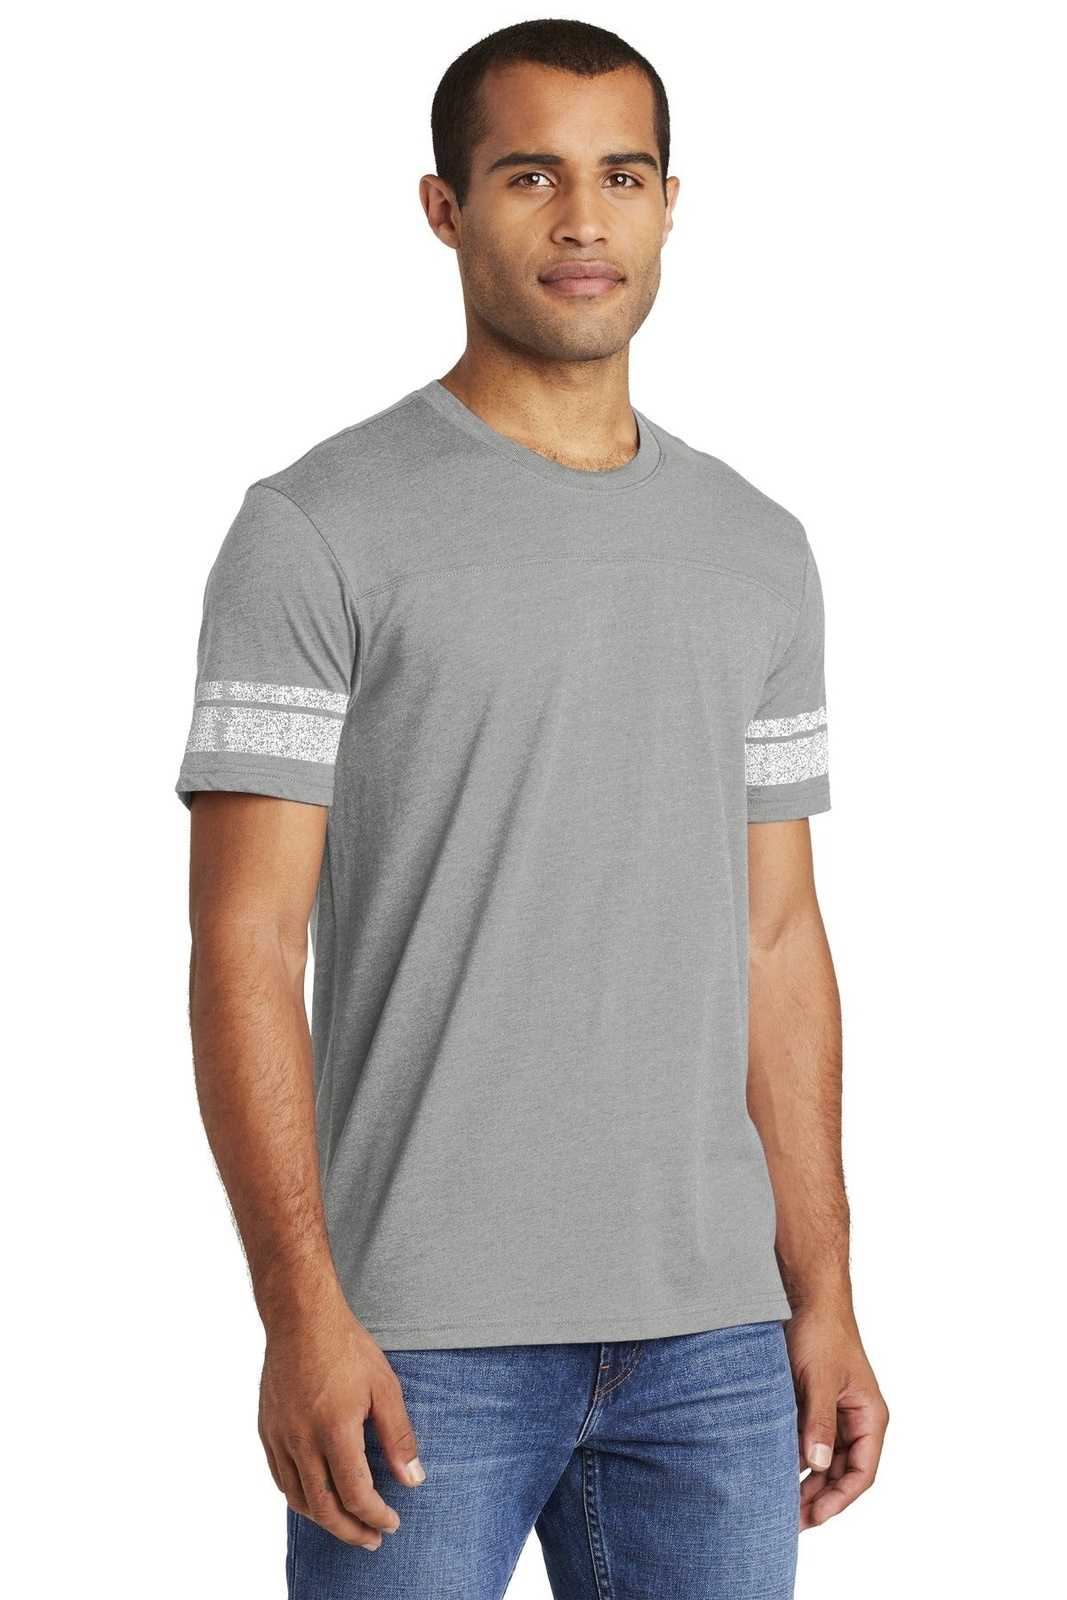 District DT376 Game Tee - Heathered Nickel White - HIT a Double - 4